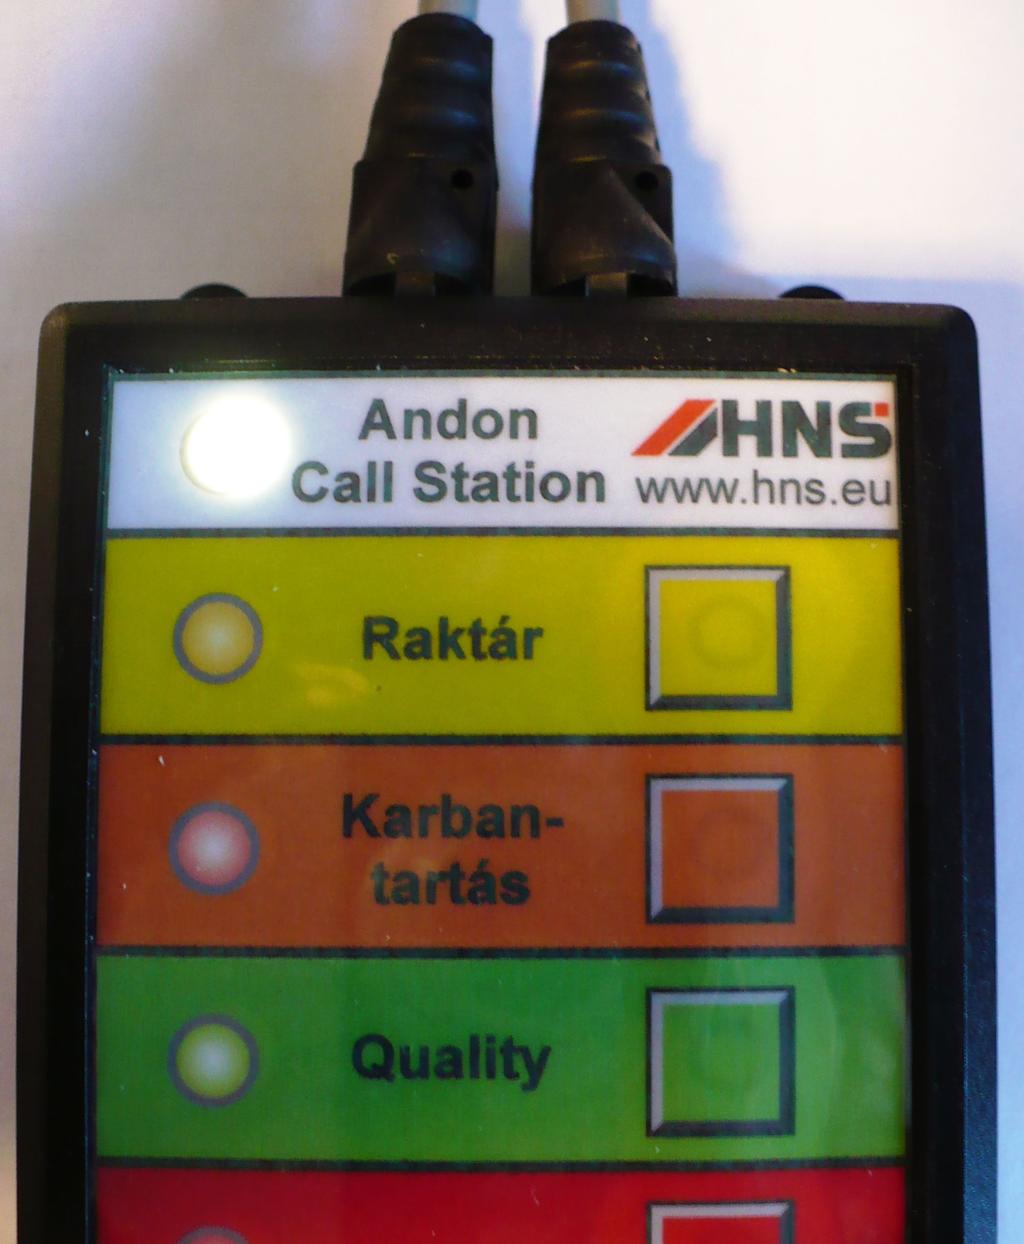 Appendix Andon Call Station Preview and functions Status LED for indicating status of communication with USB-CAN Interface.